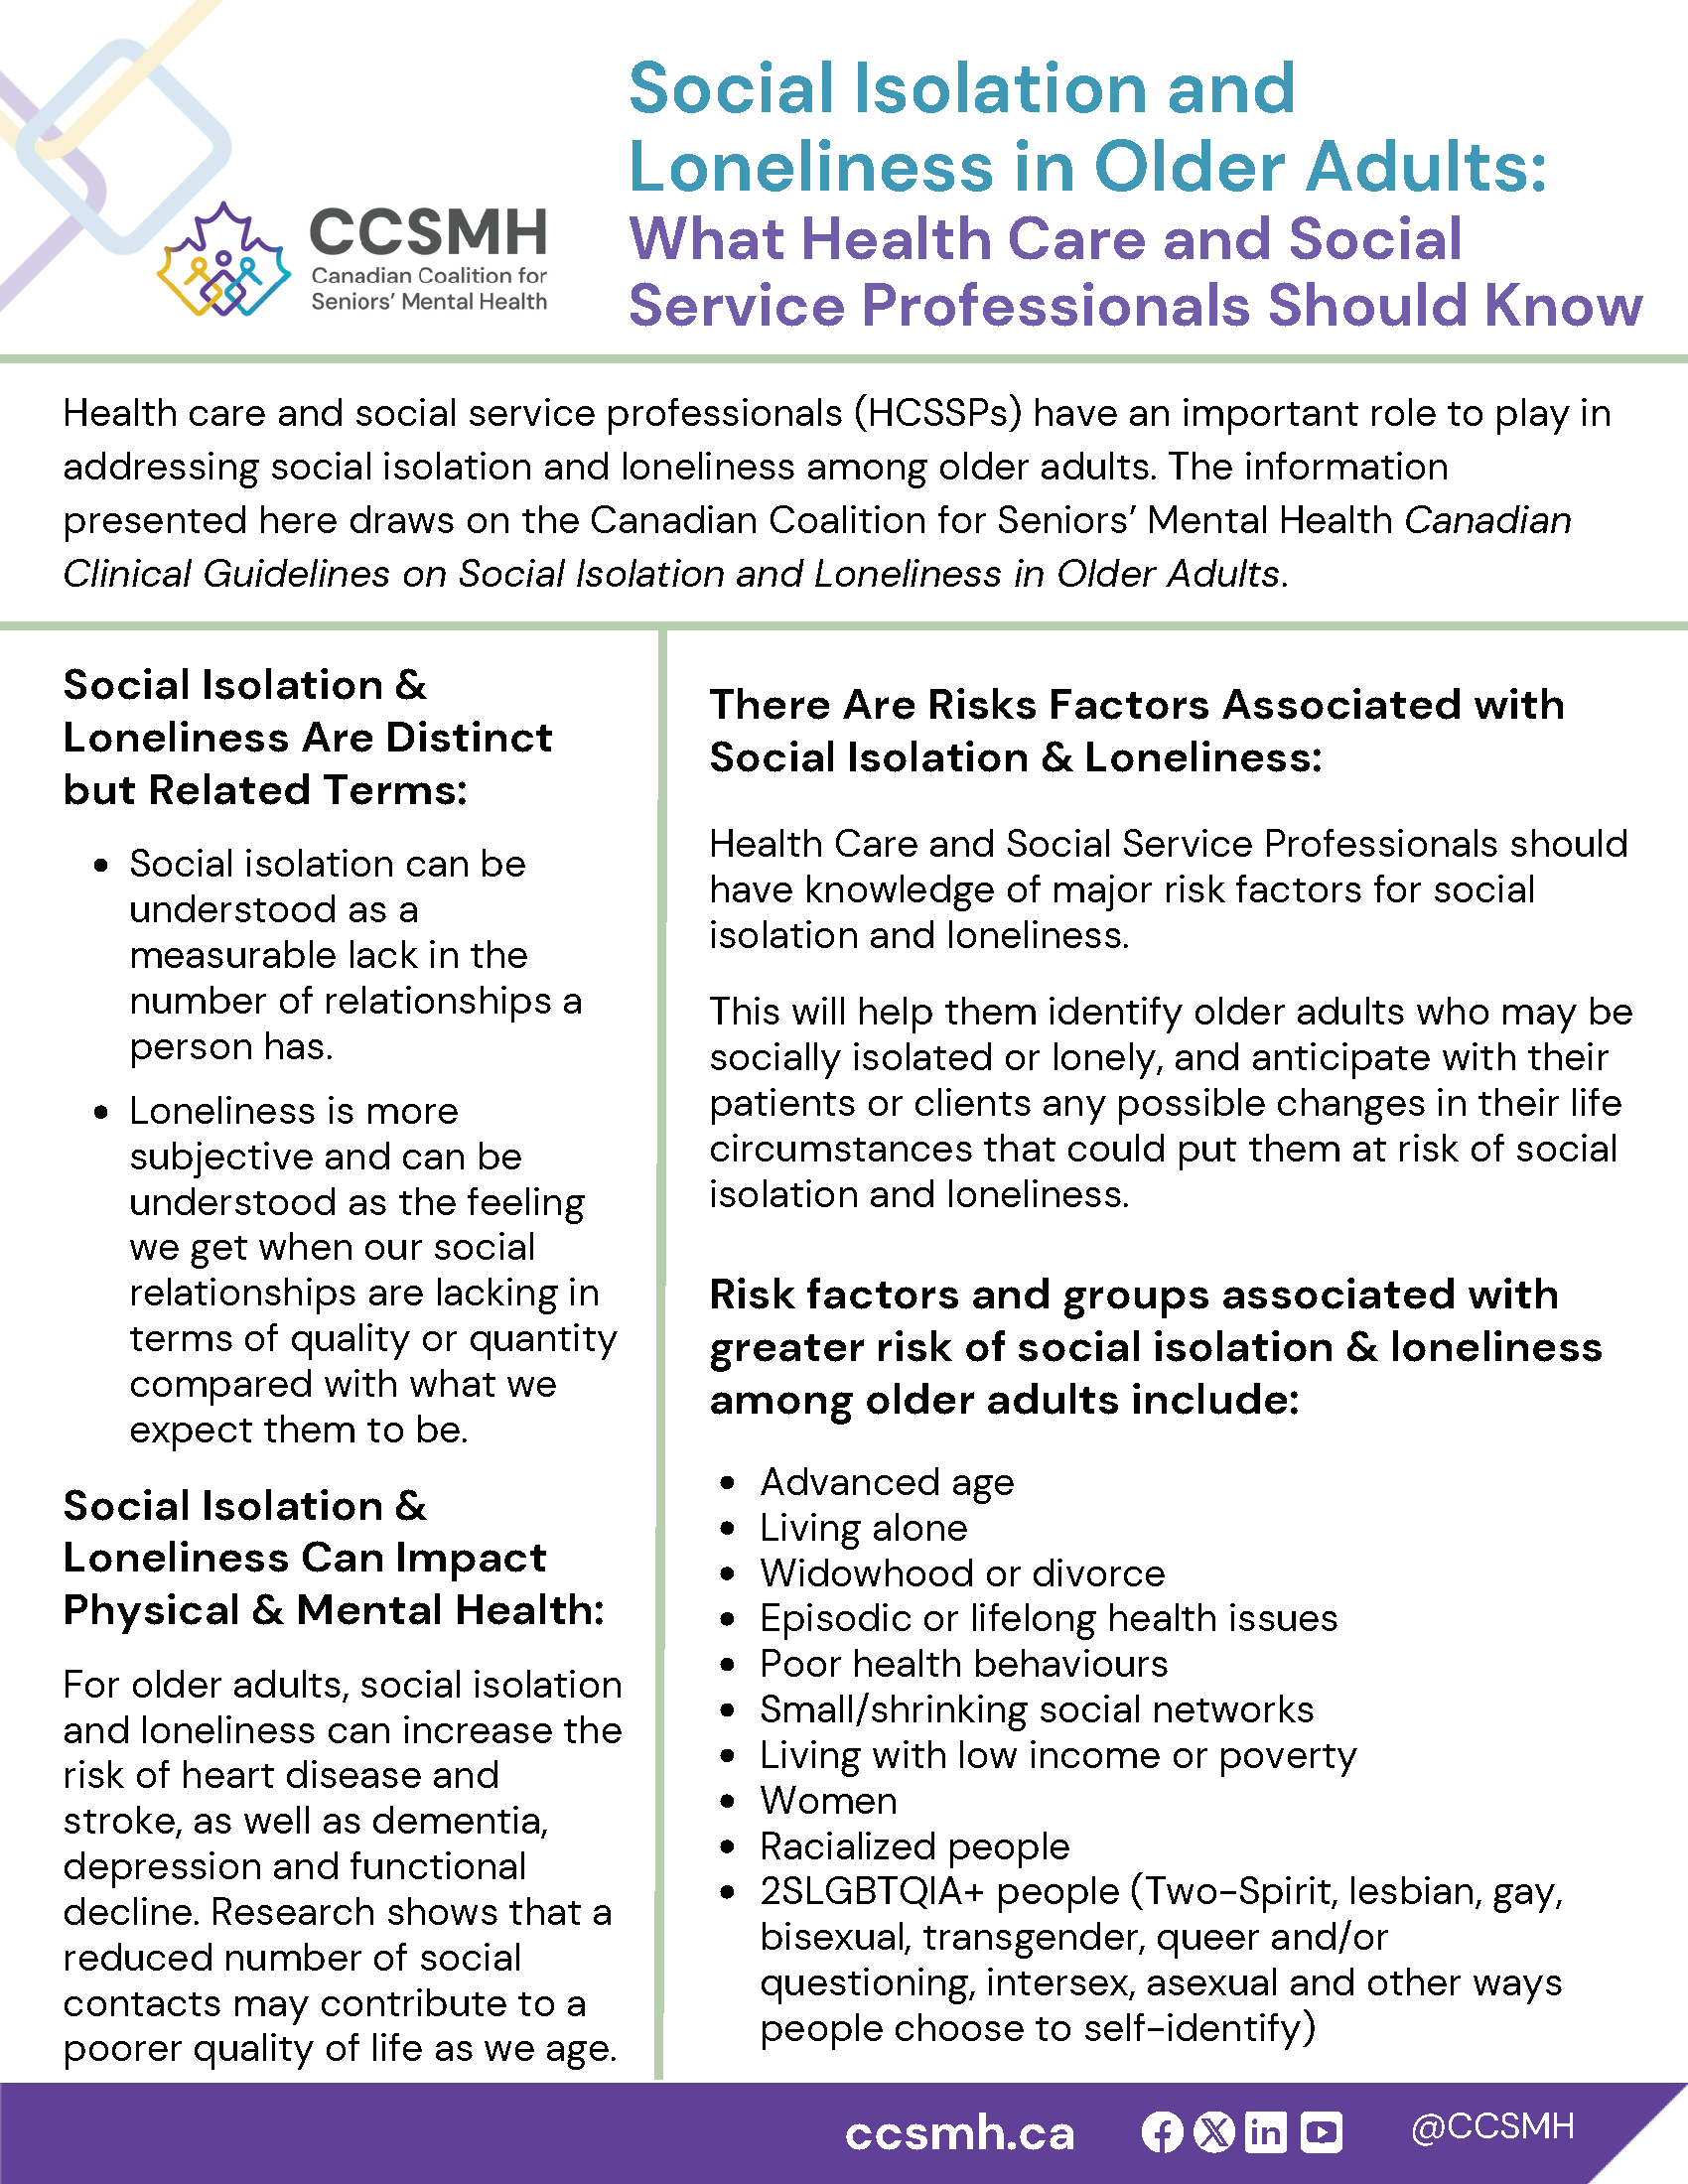 Social Isolation and Loneliness - What healthcare and social service professionals should know